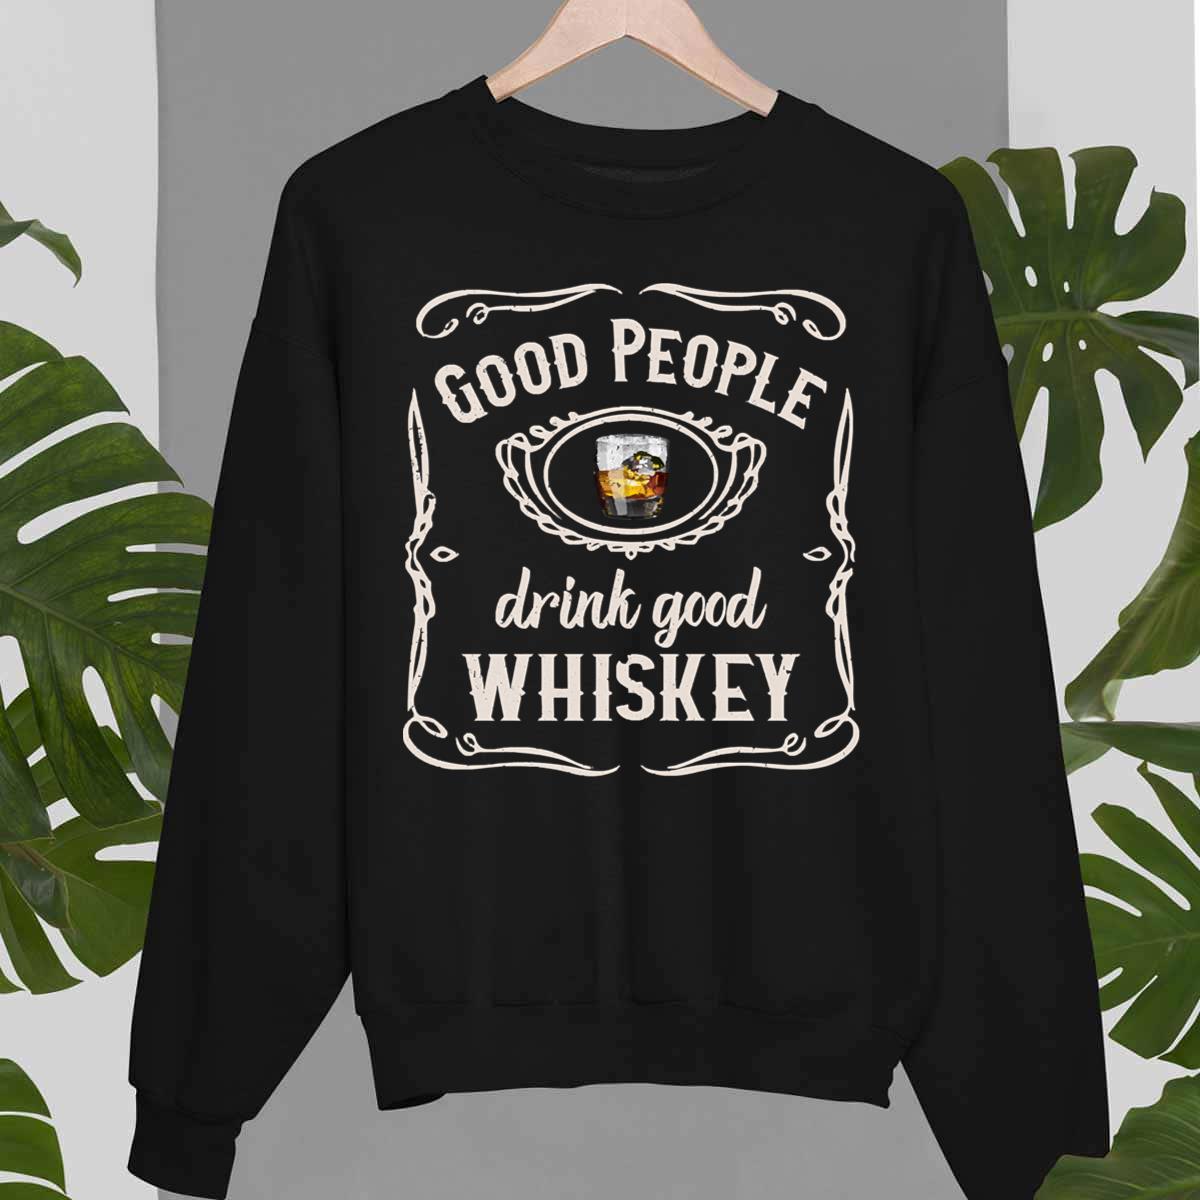 Good People Drink Good Whiskey Helps Unisex T-Shirt